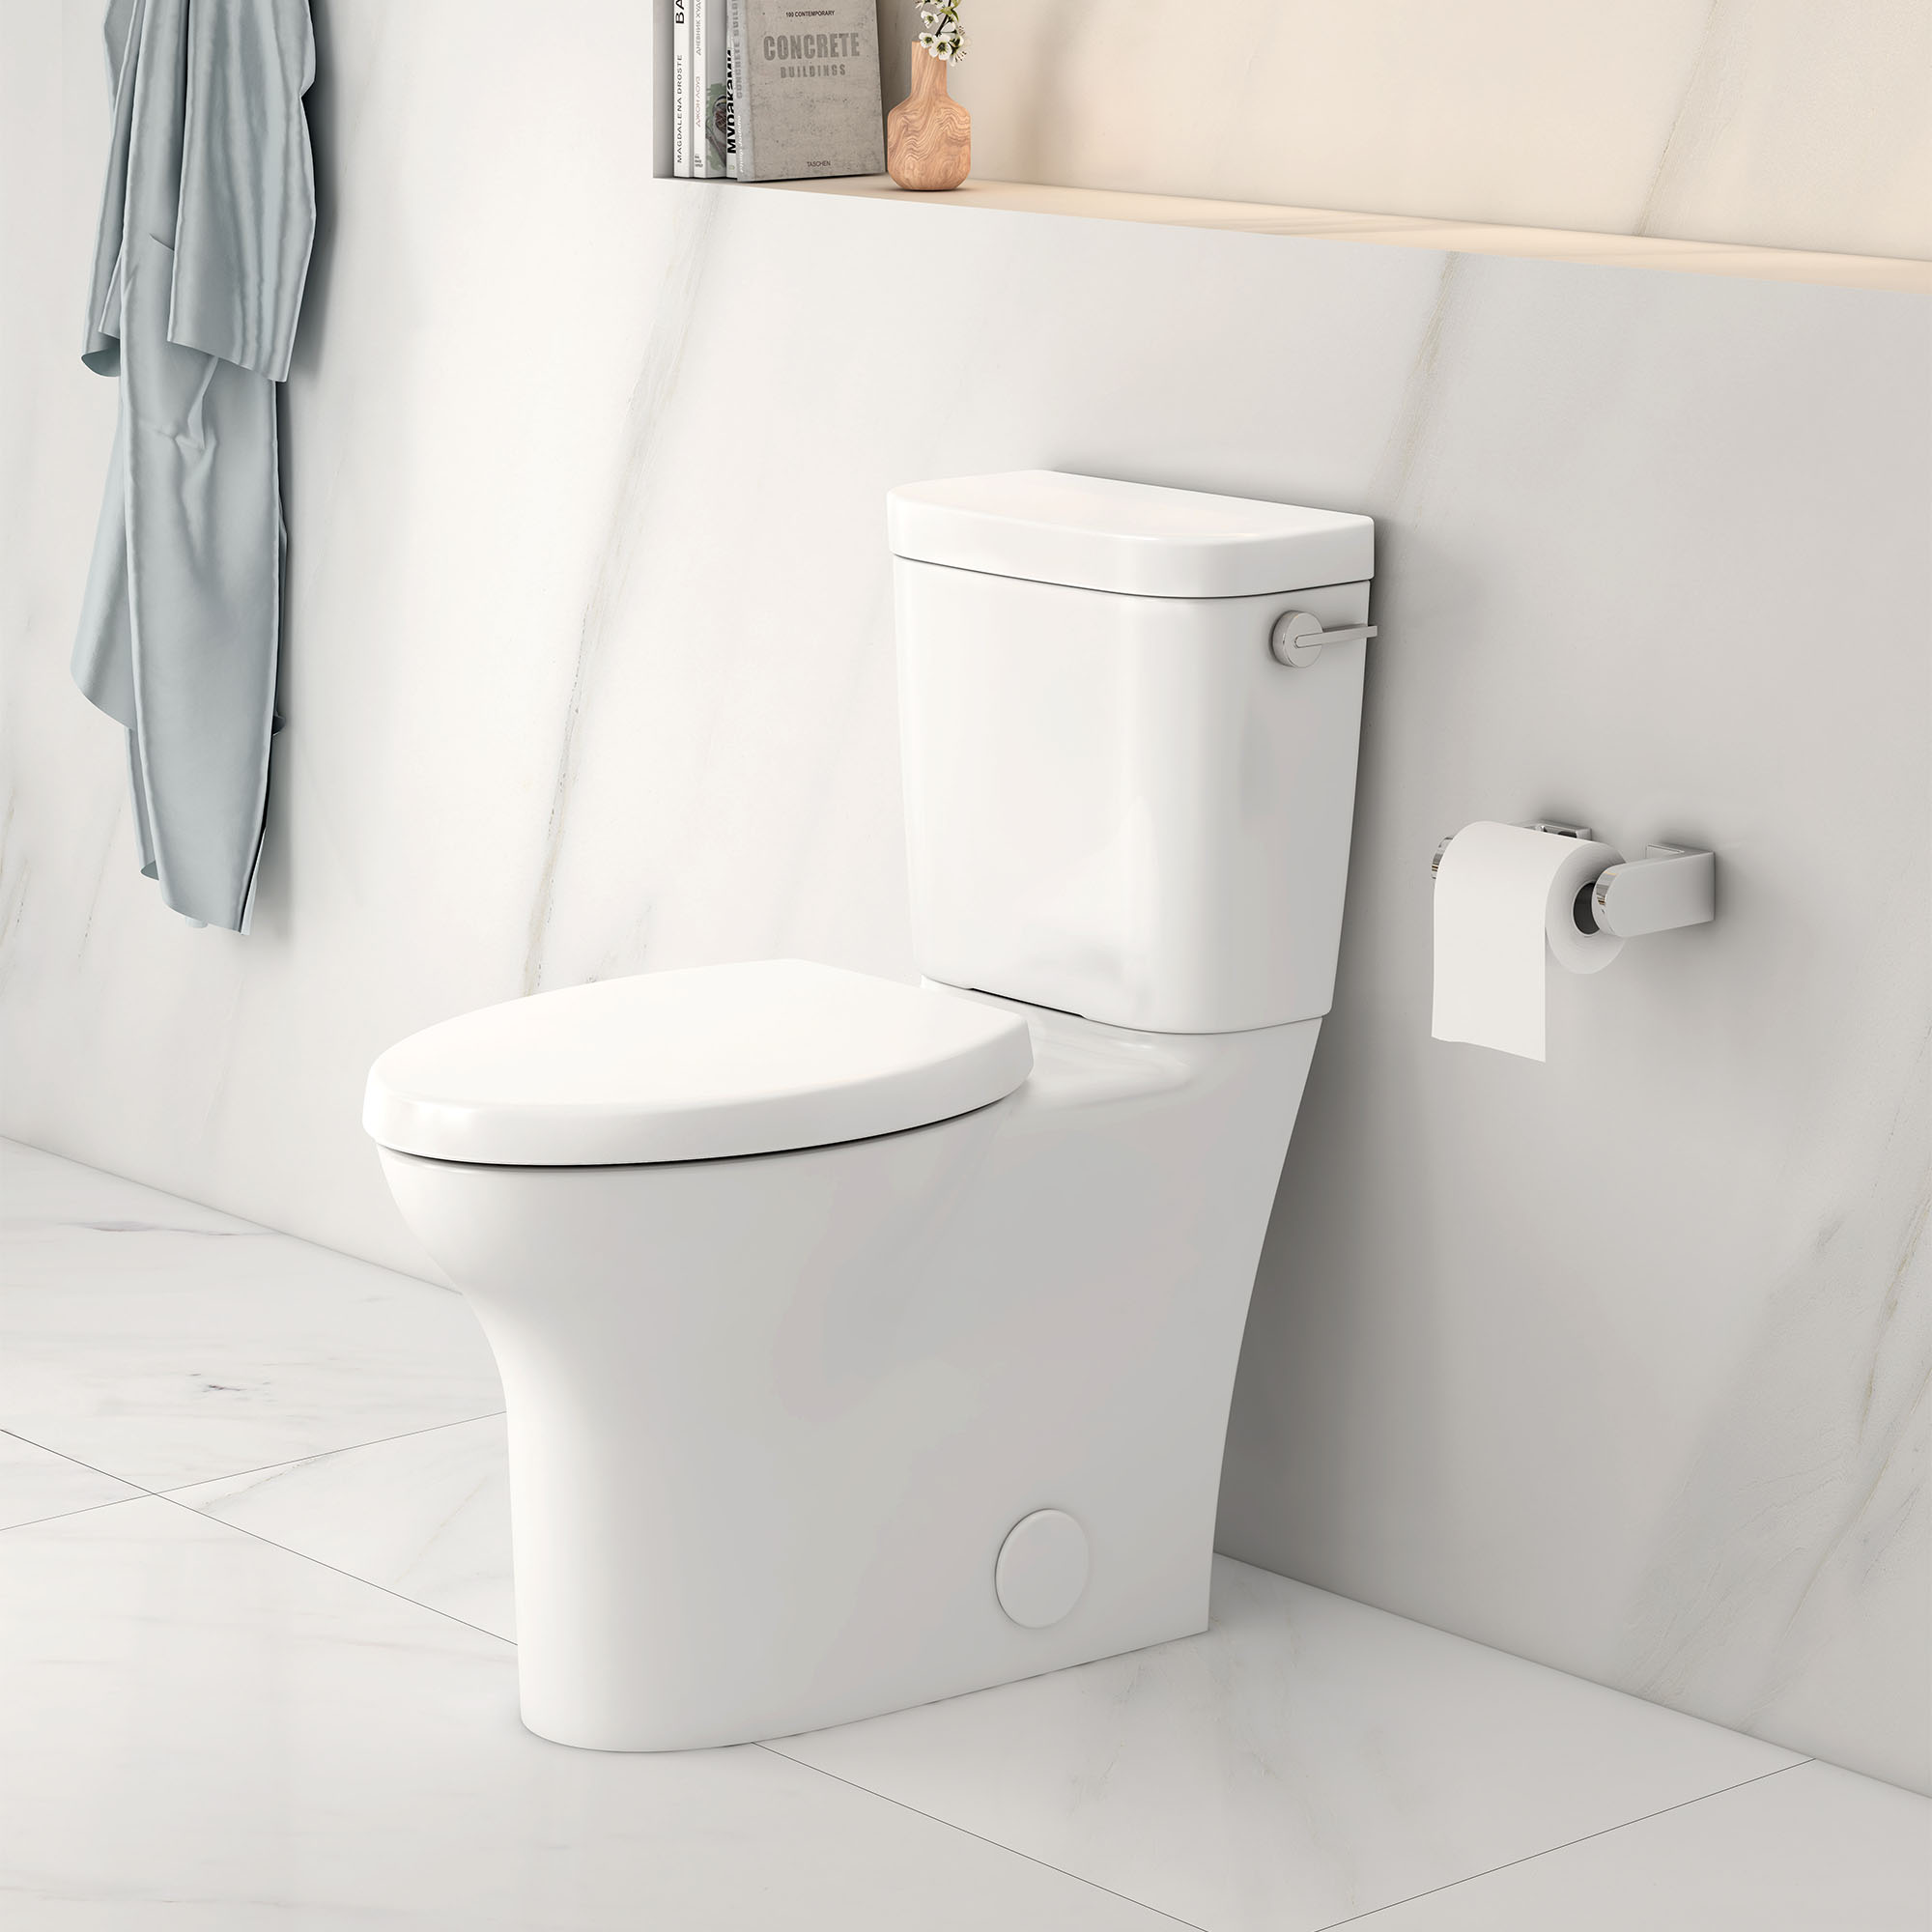 Equility® Two-Piece Chair Height Right-Hand Trip Lever Elongated Toilet with Seat